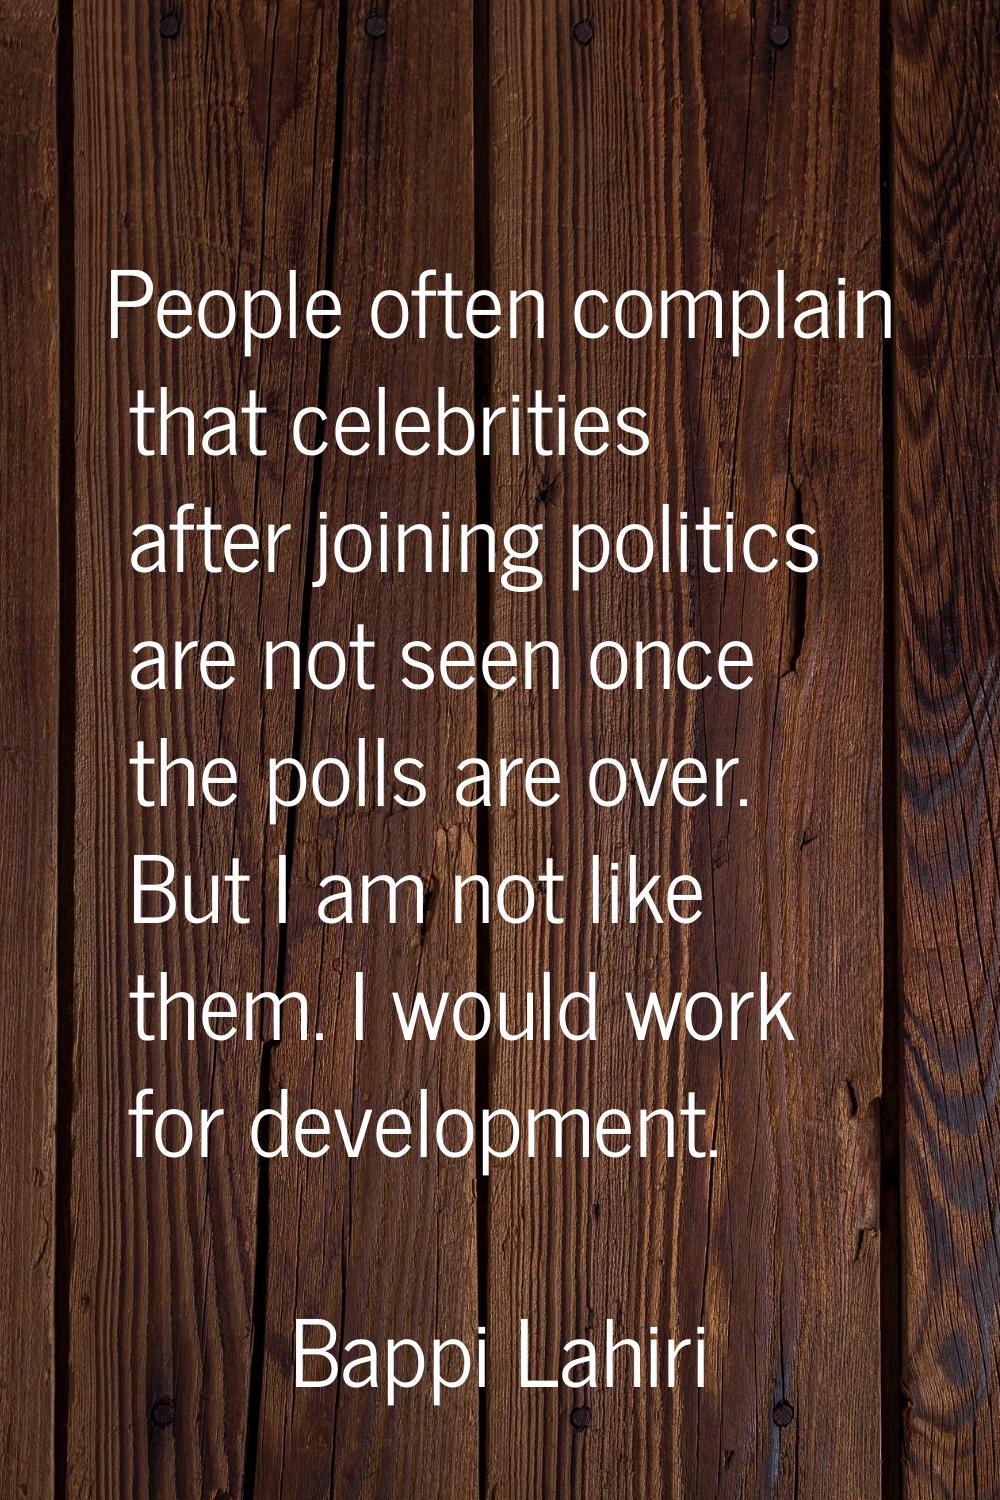 People often complain that celebrities after joining politics are not seen once the polls are over.